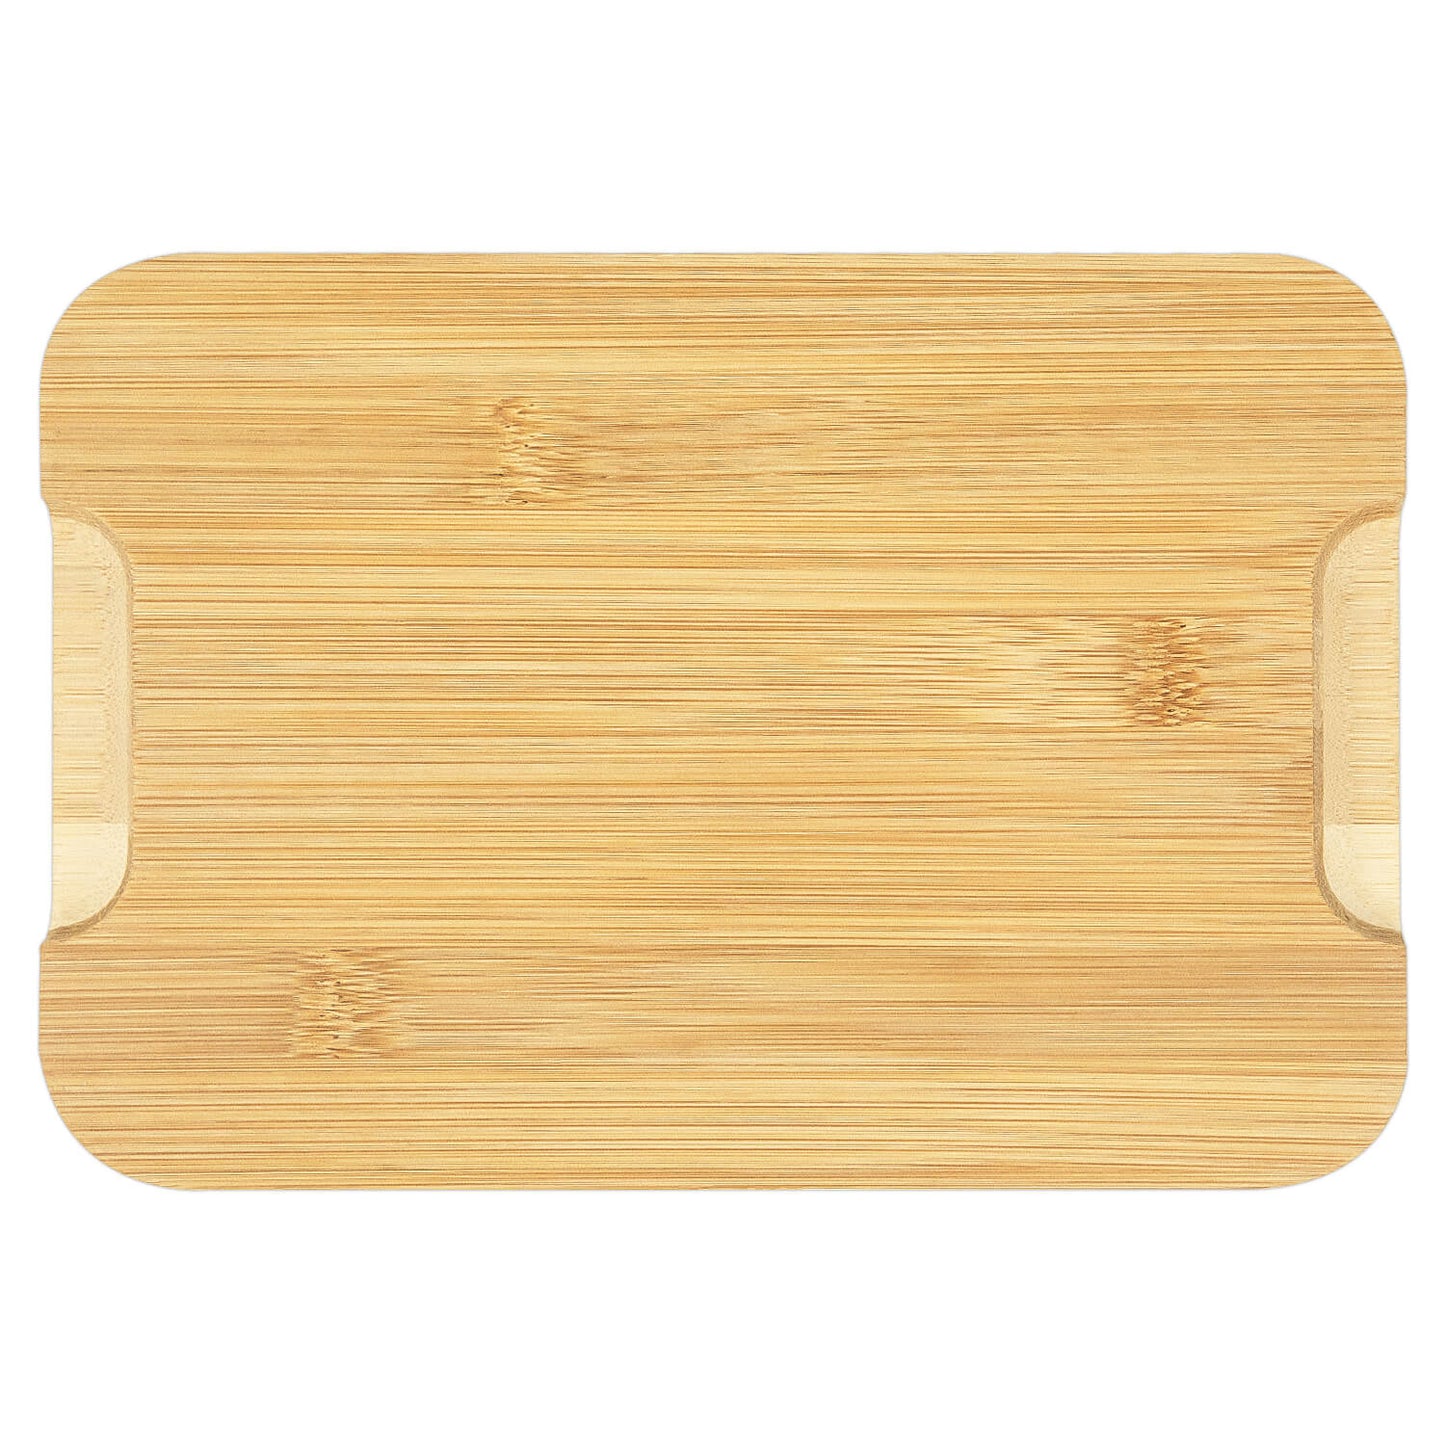 GL-Bamboo Small Cutting Board with Juice Groove and Finger-Grip Handles